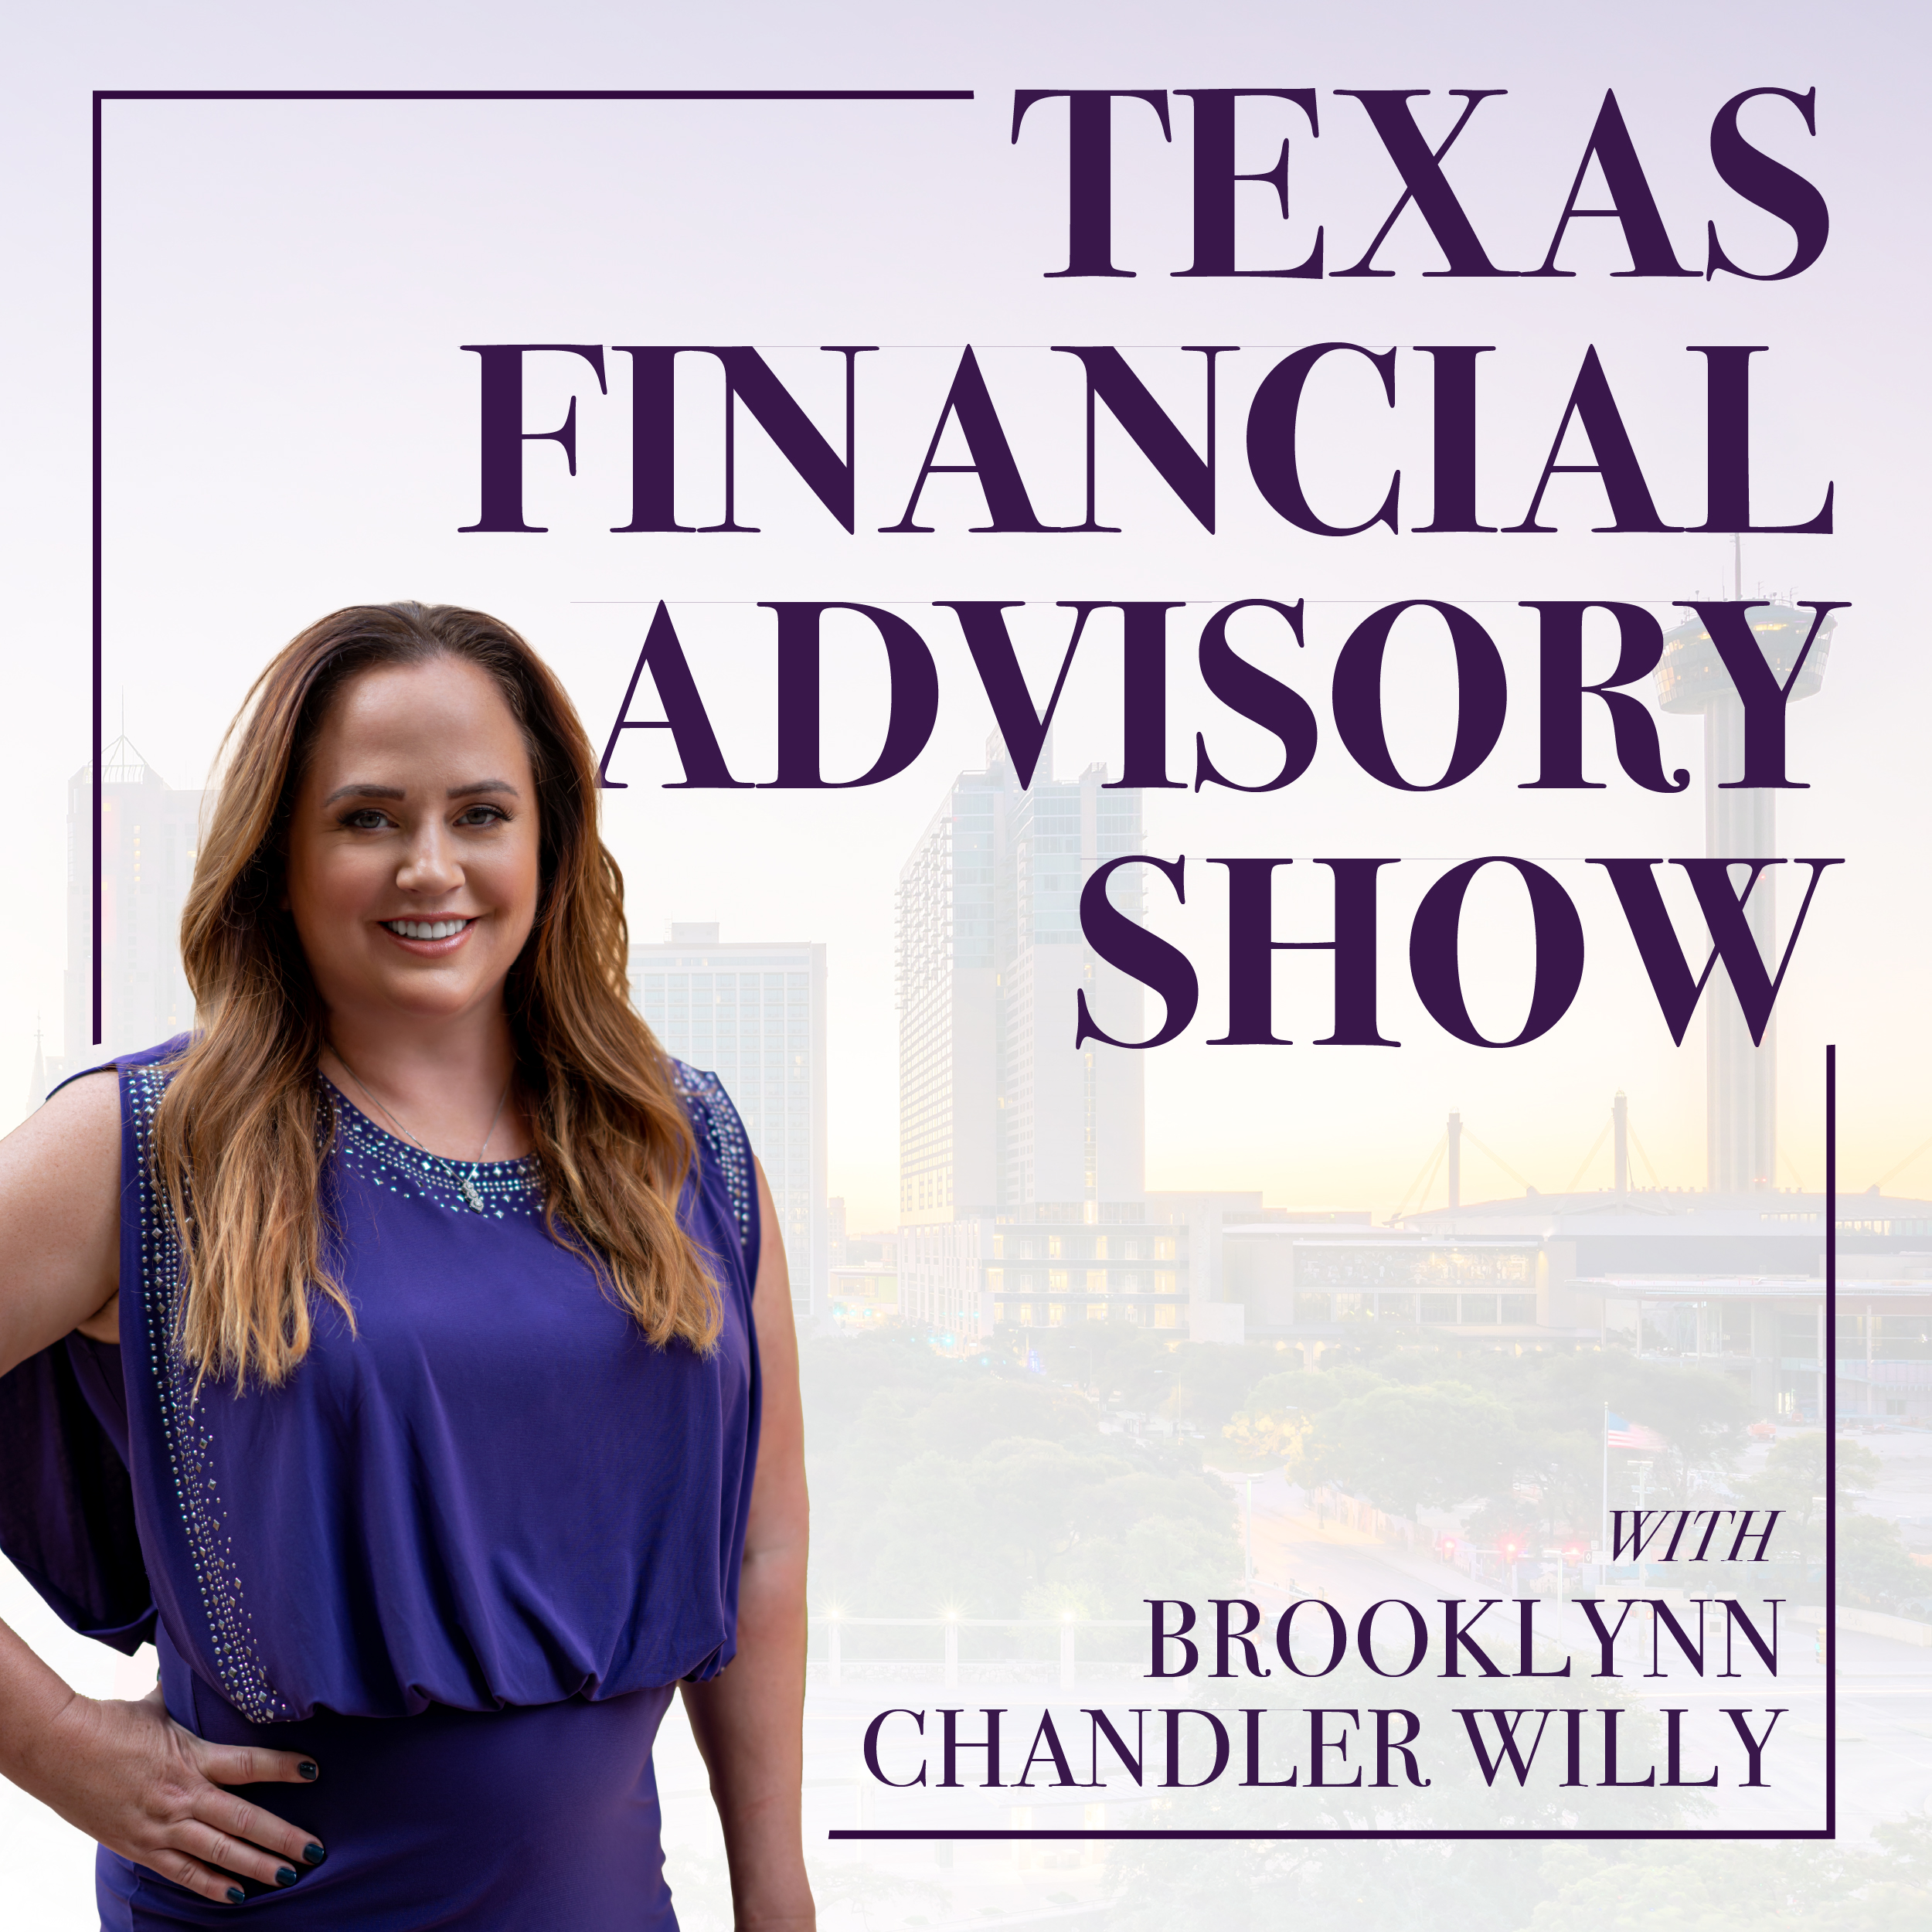 Texas Financial Advisory Group This week Brooklynn and her team discuss 401Ks and share some great client stories.